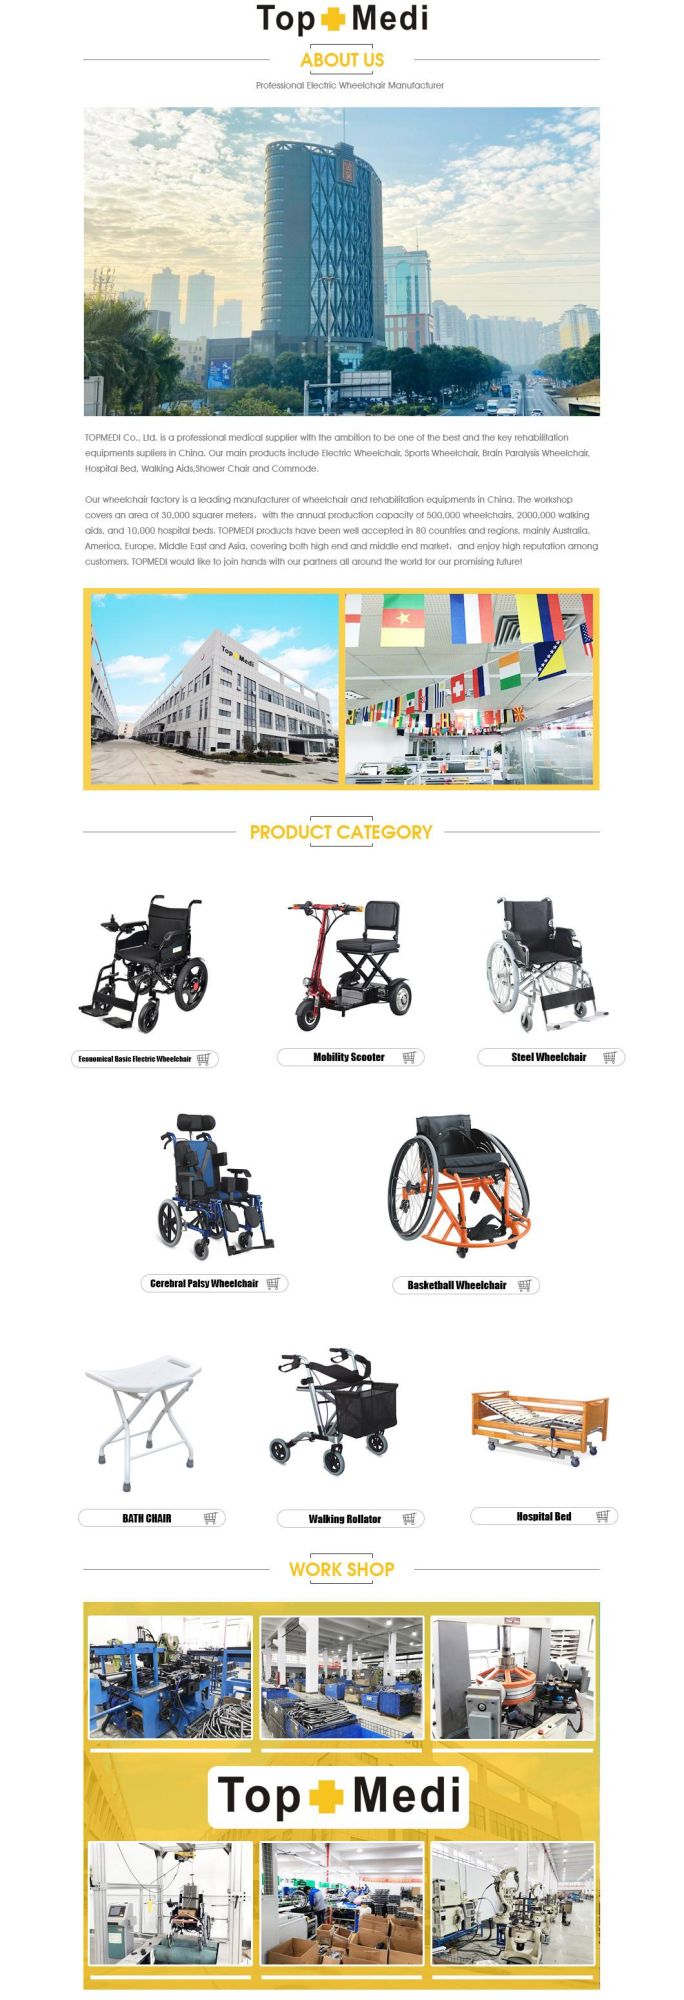 Easy Folding Electric Wheelchair Power Wheelchair for Handicapped